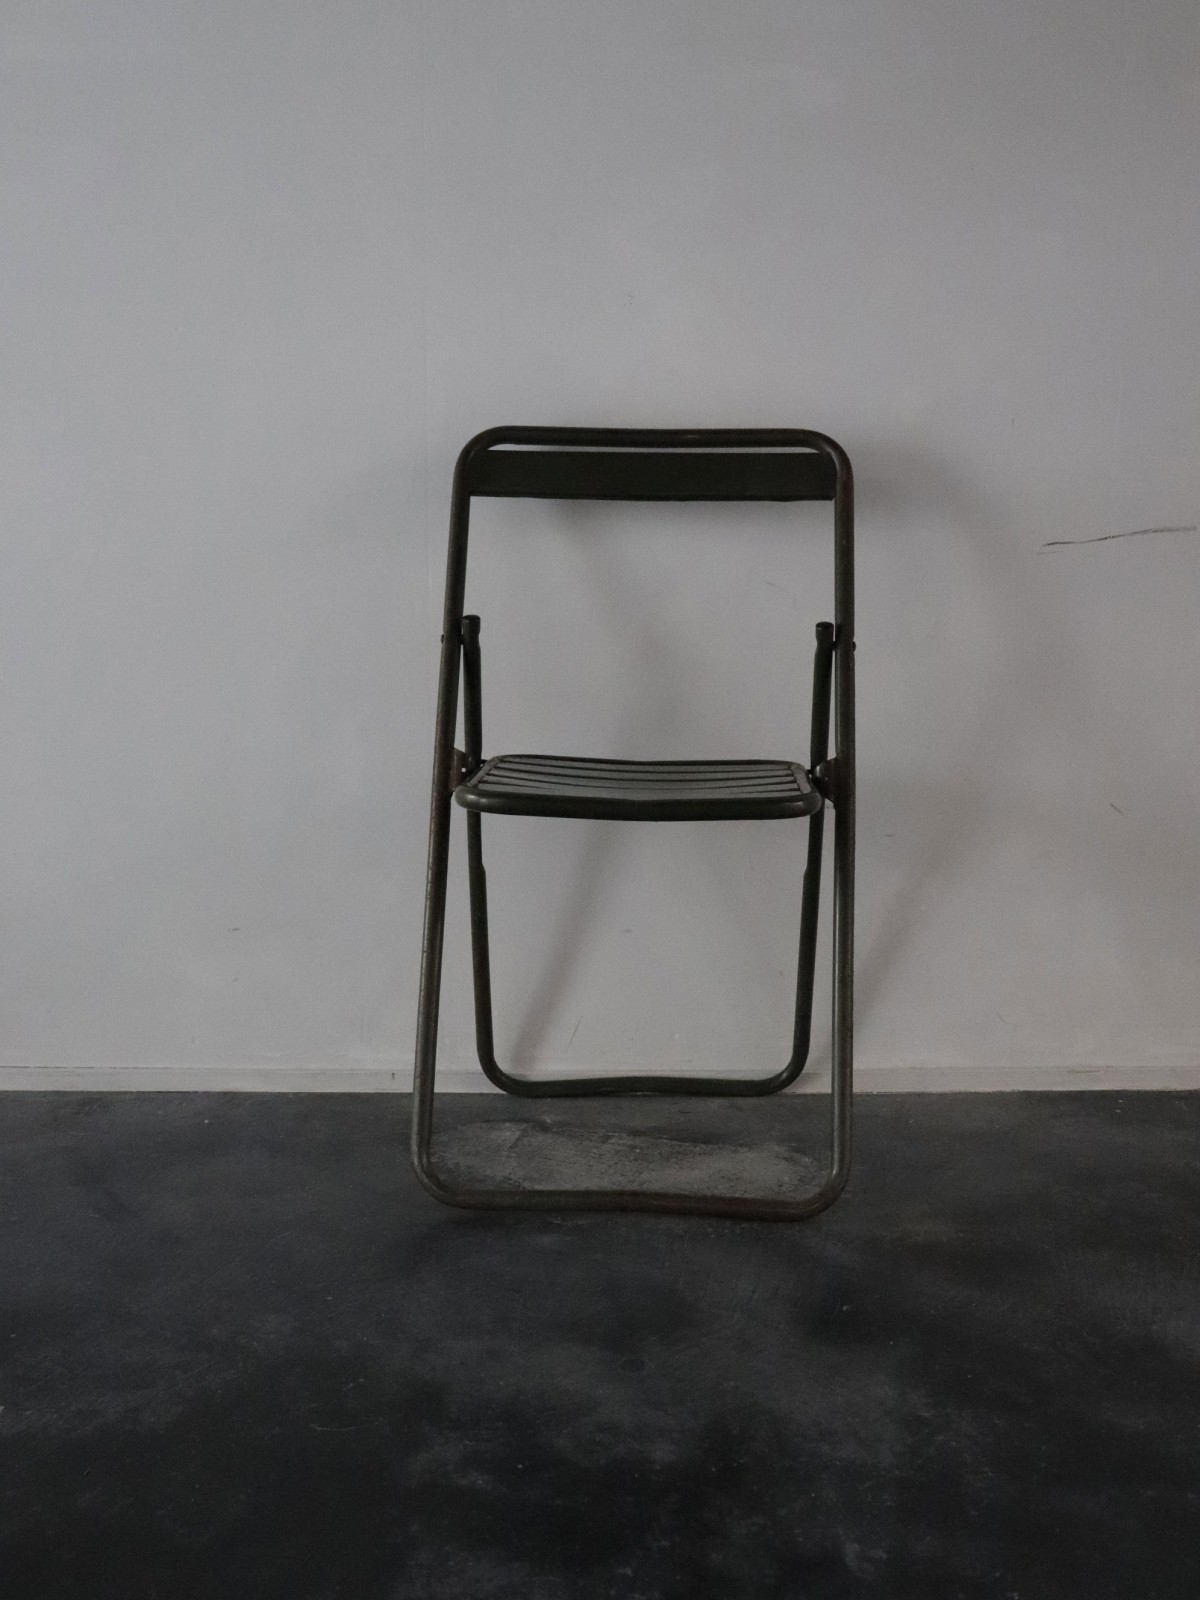 french military, folding chair, metal chair